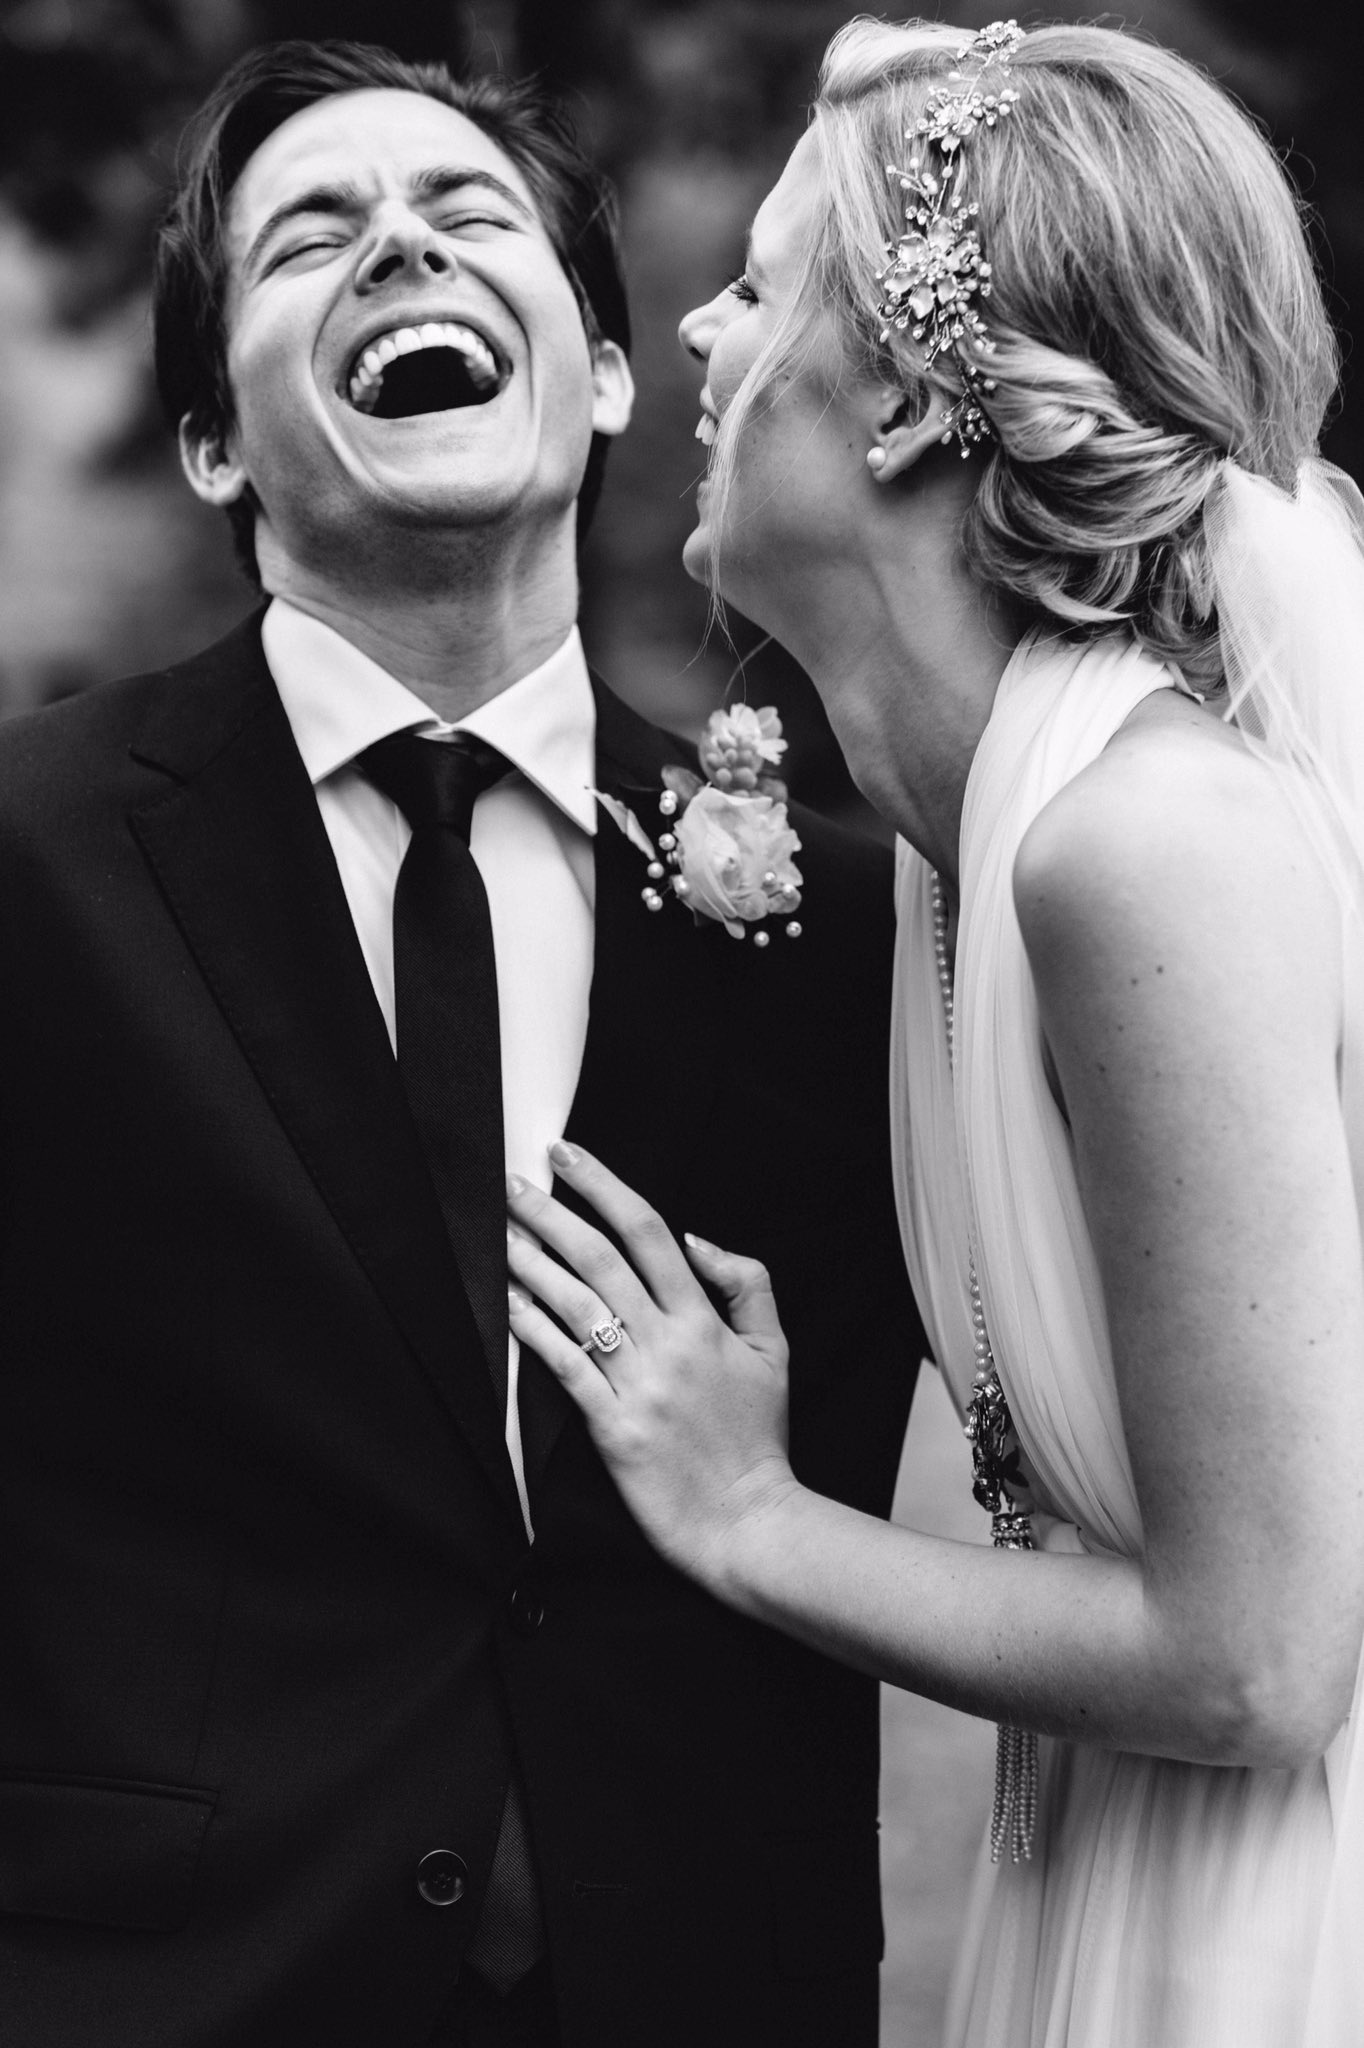 Molly Kate on Twitter: "Marry the one who you laugh more than else. https://t.co/3bySQap34R" /